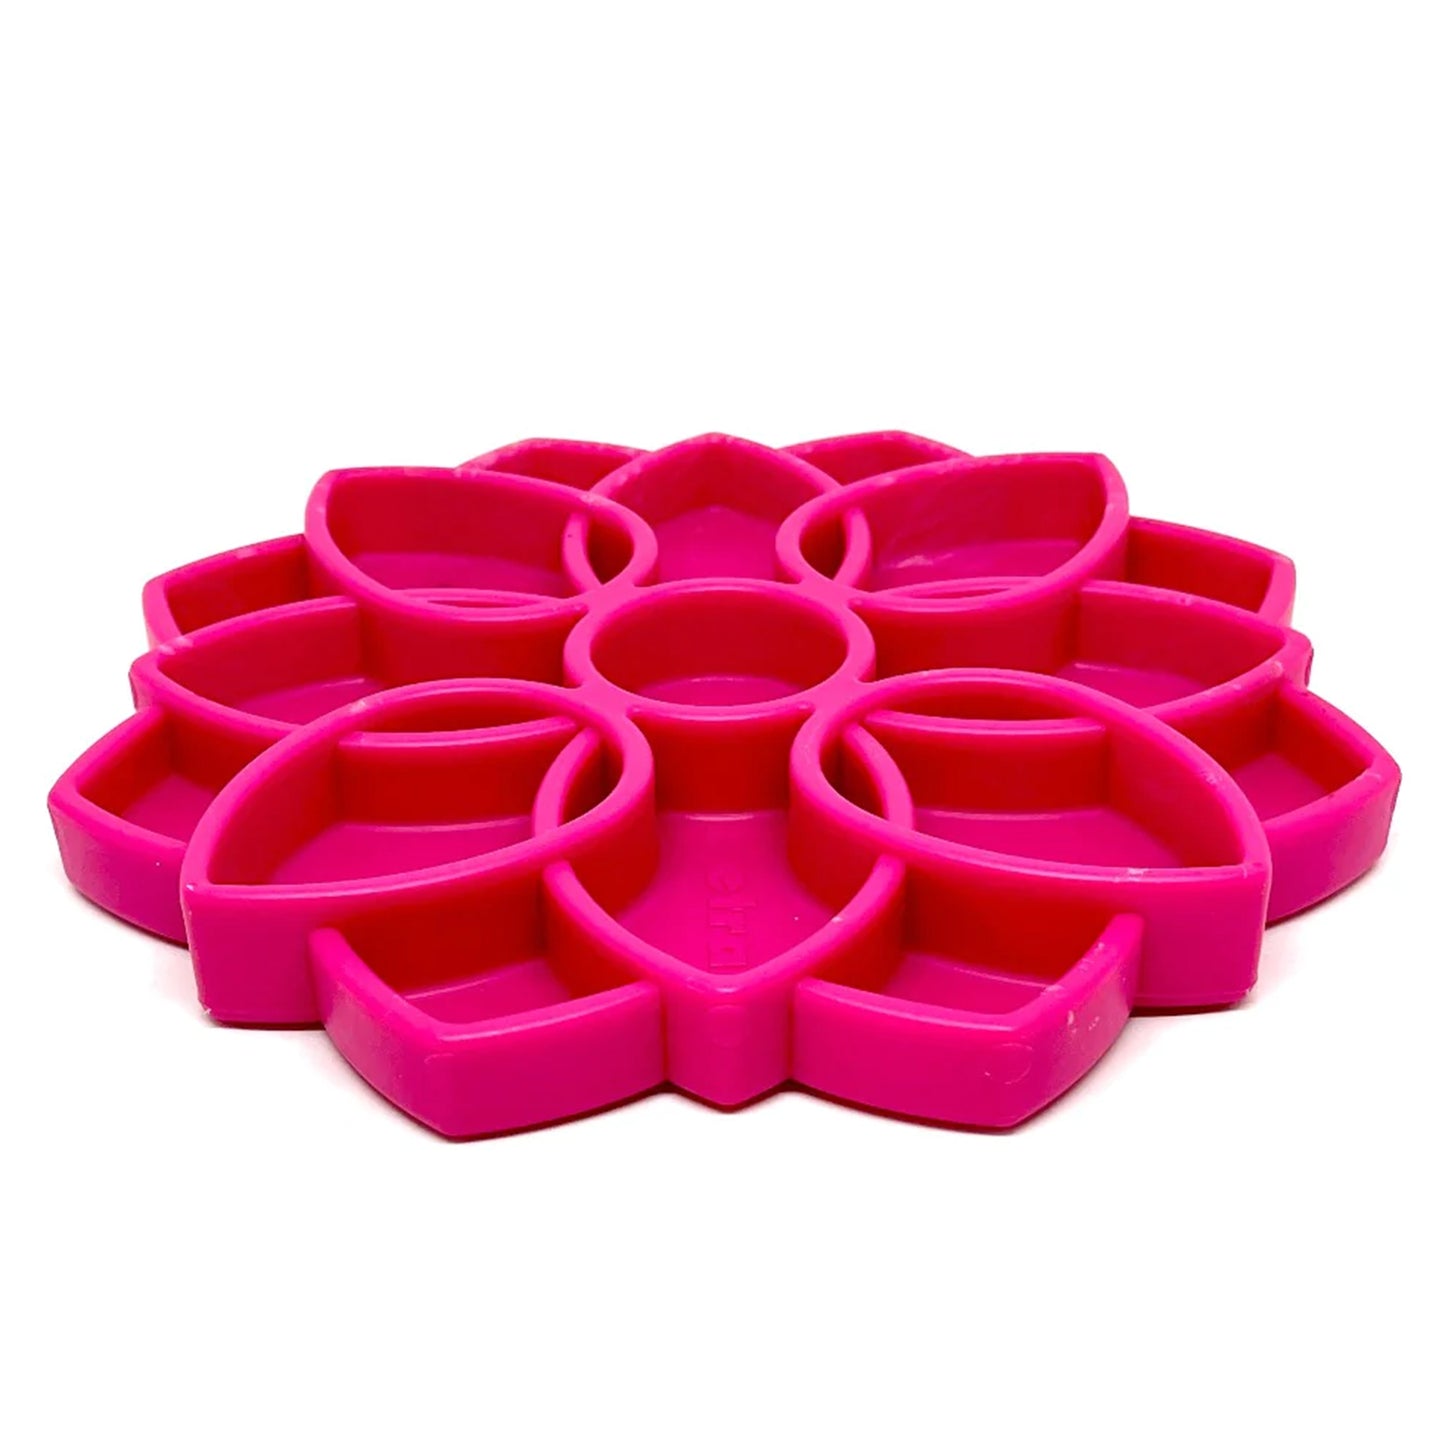 SodaPup Mandala eTray Enrichment Tray for Dogs